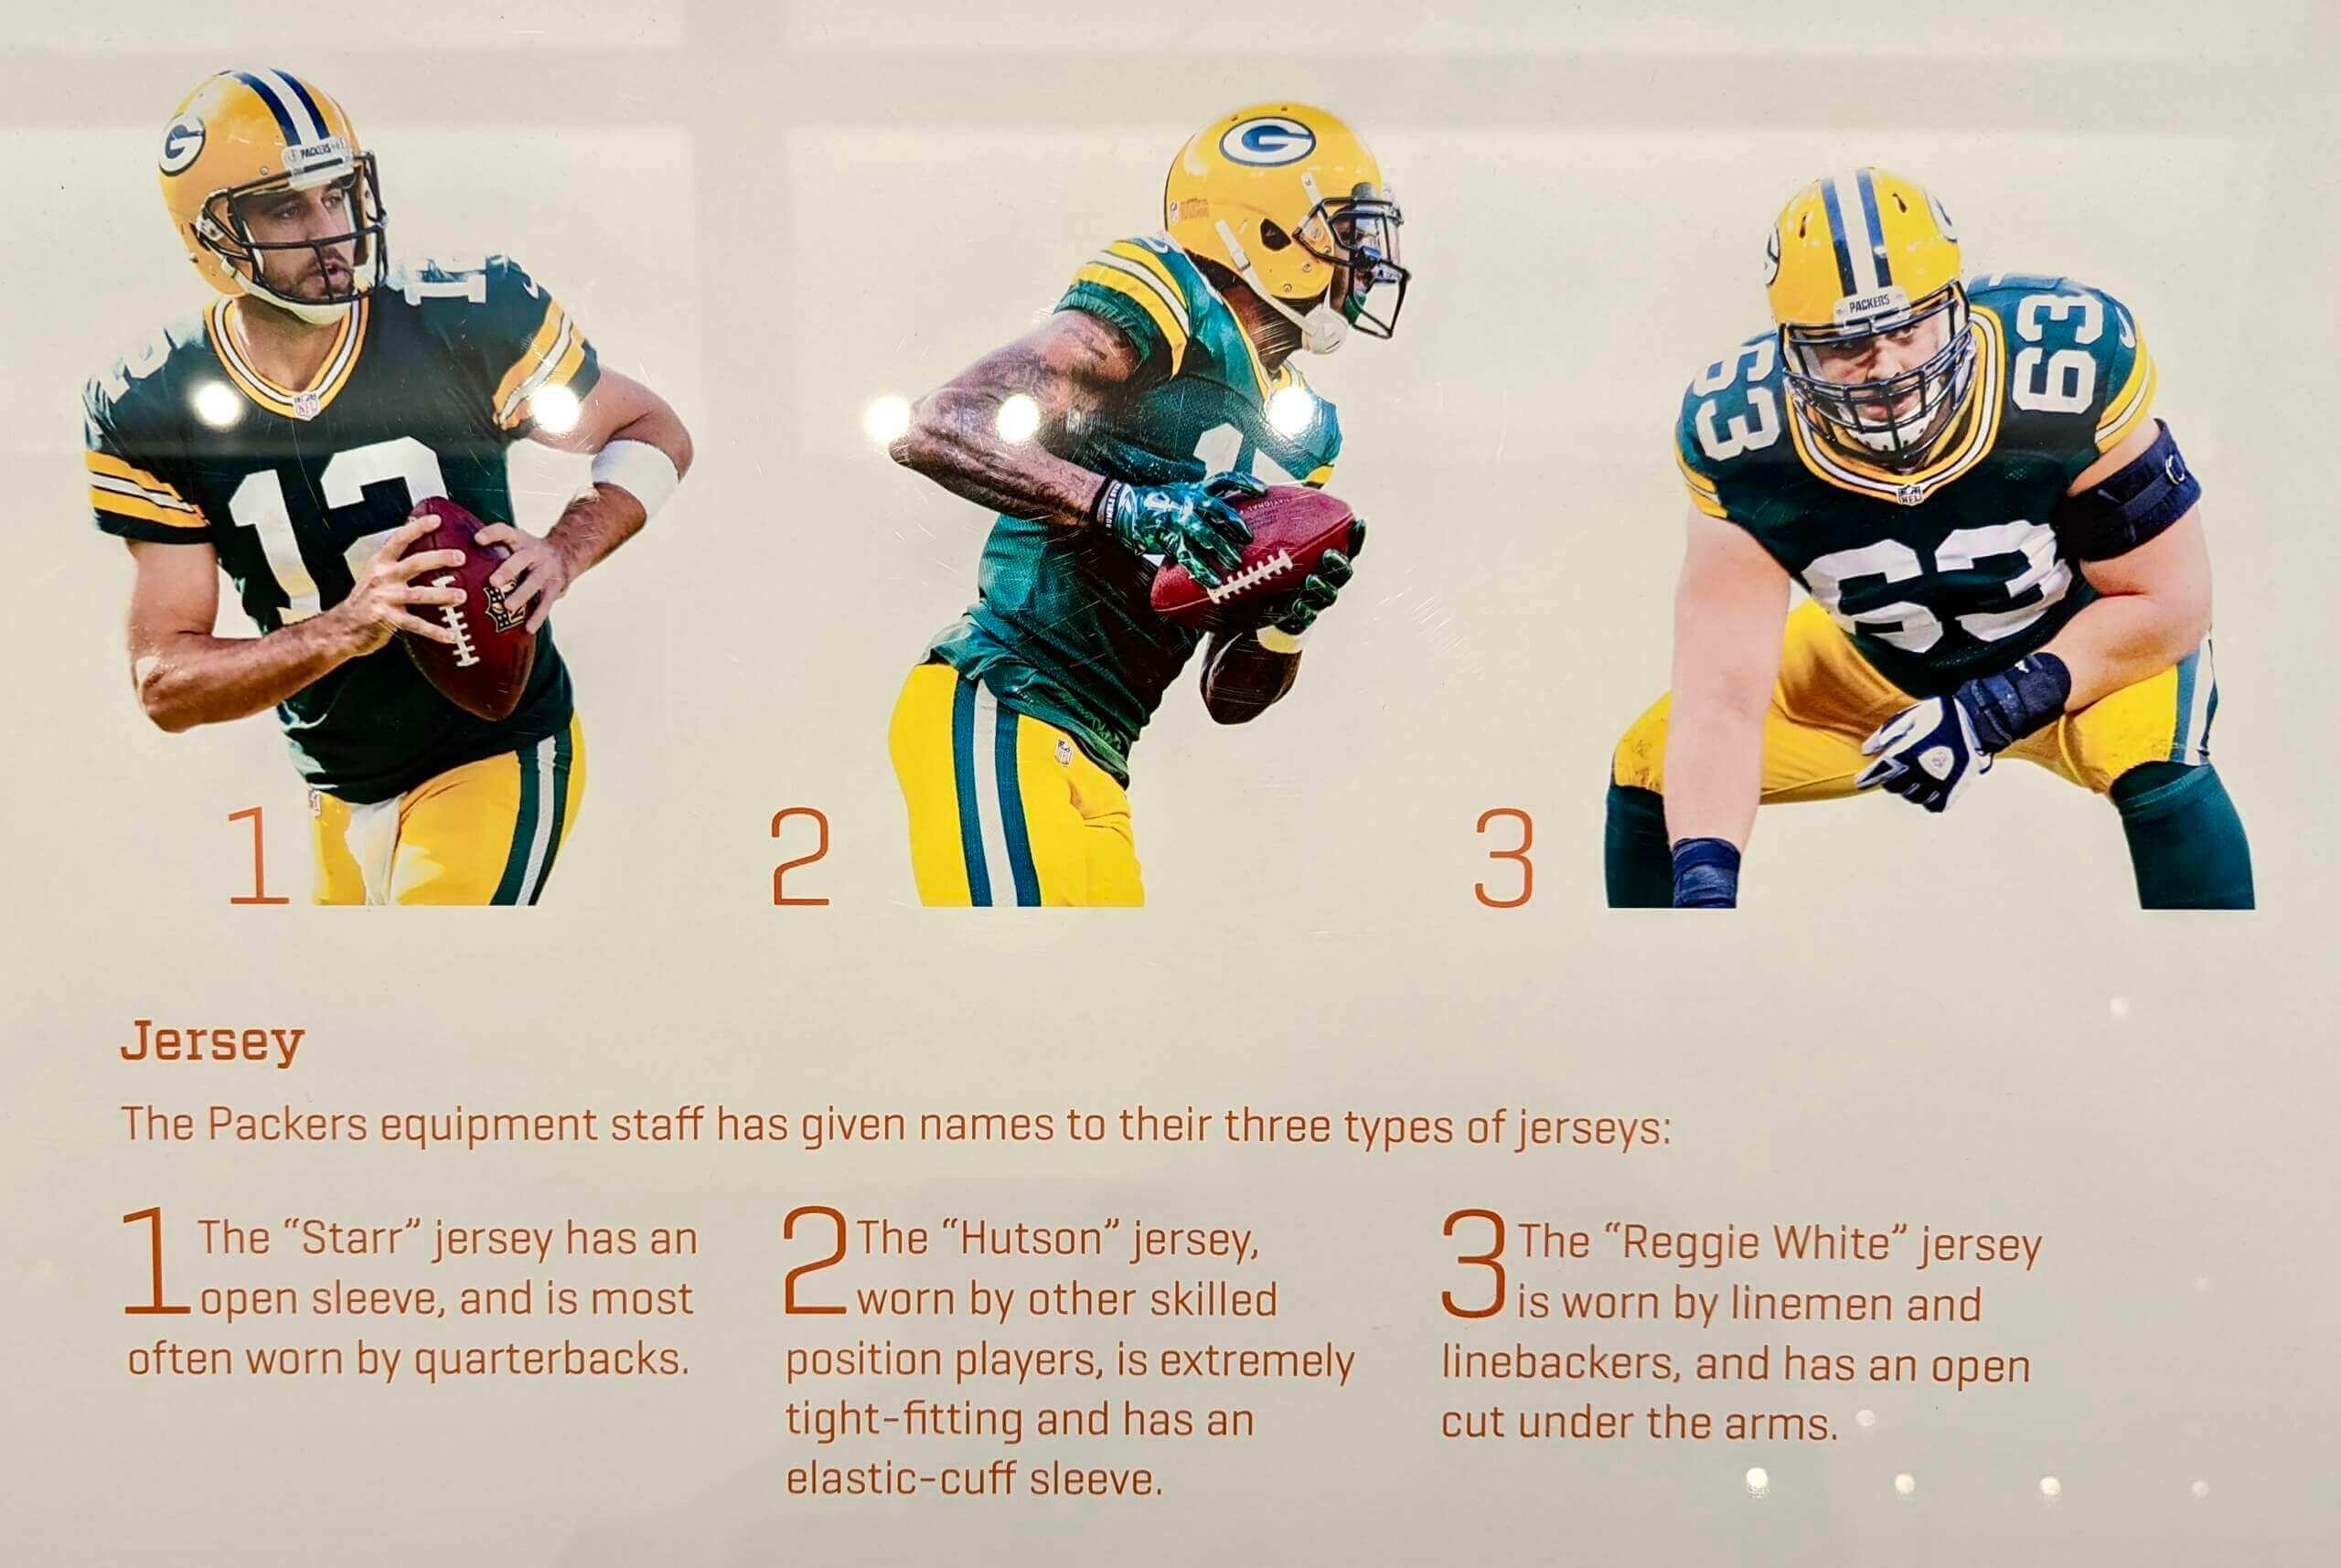 Uni Watch: Uniform ads in NBA, NFL, MLB and NHL? Don't count on it anytime  soon - ESPN